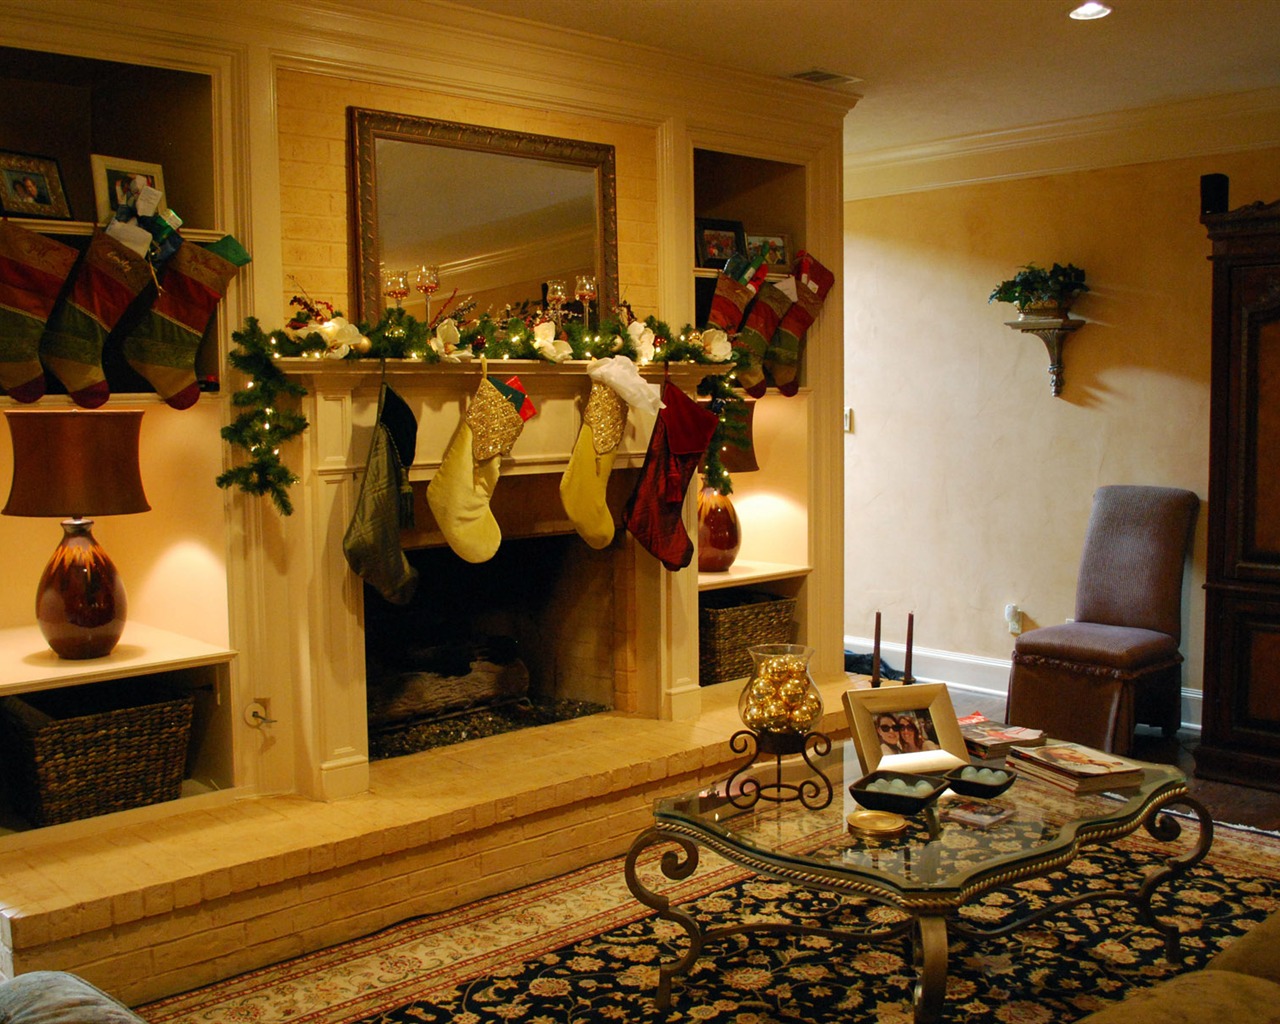 Western-style family fireplace wallpaper (2) #8 - 1280x1024